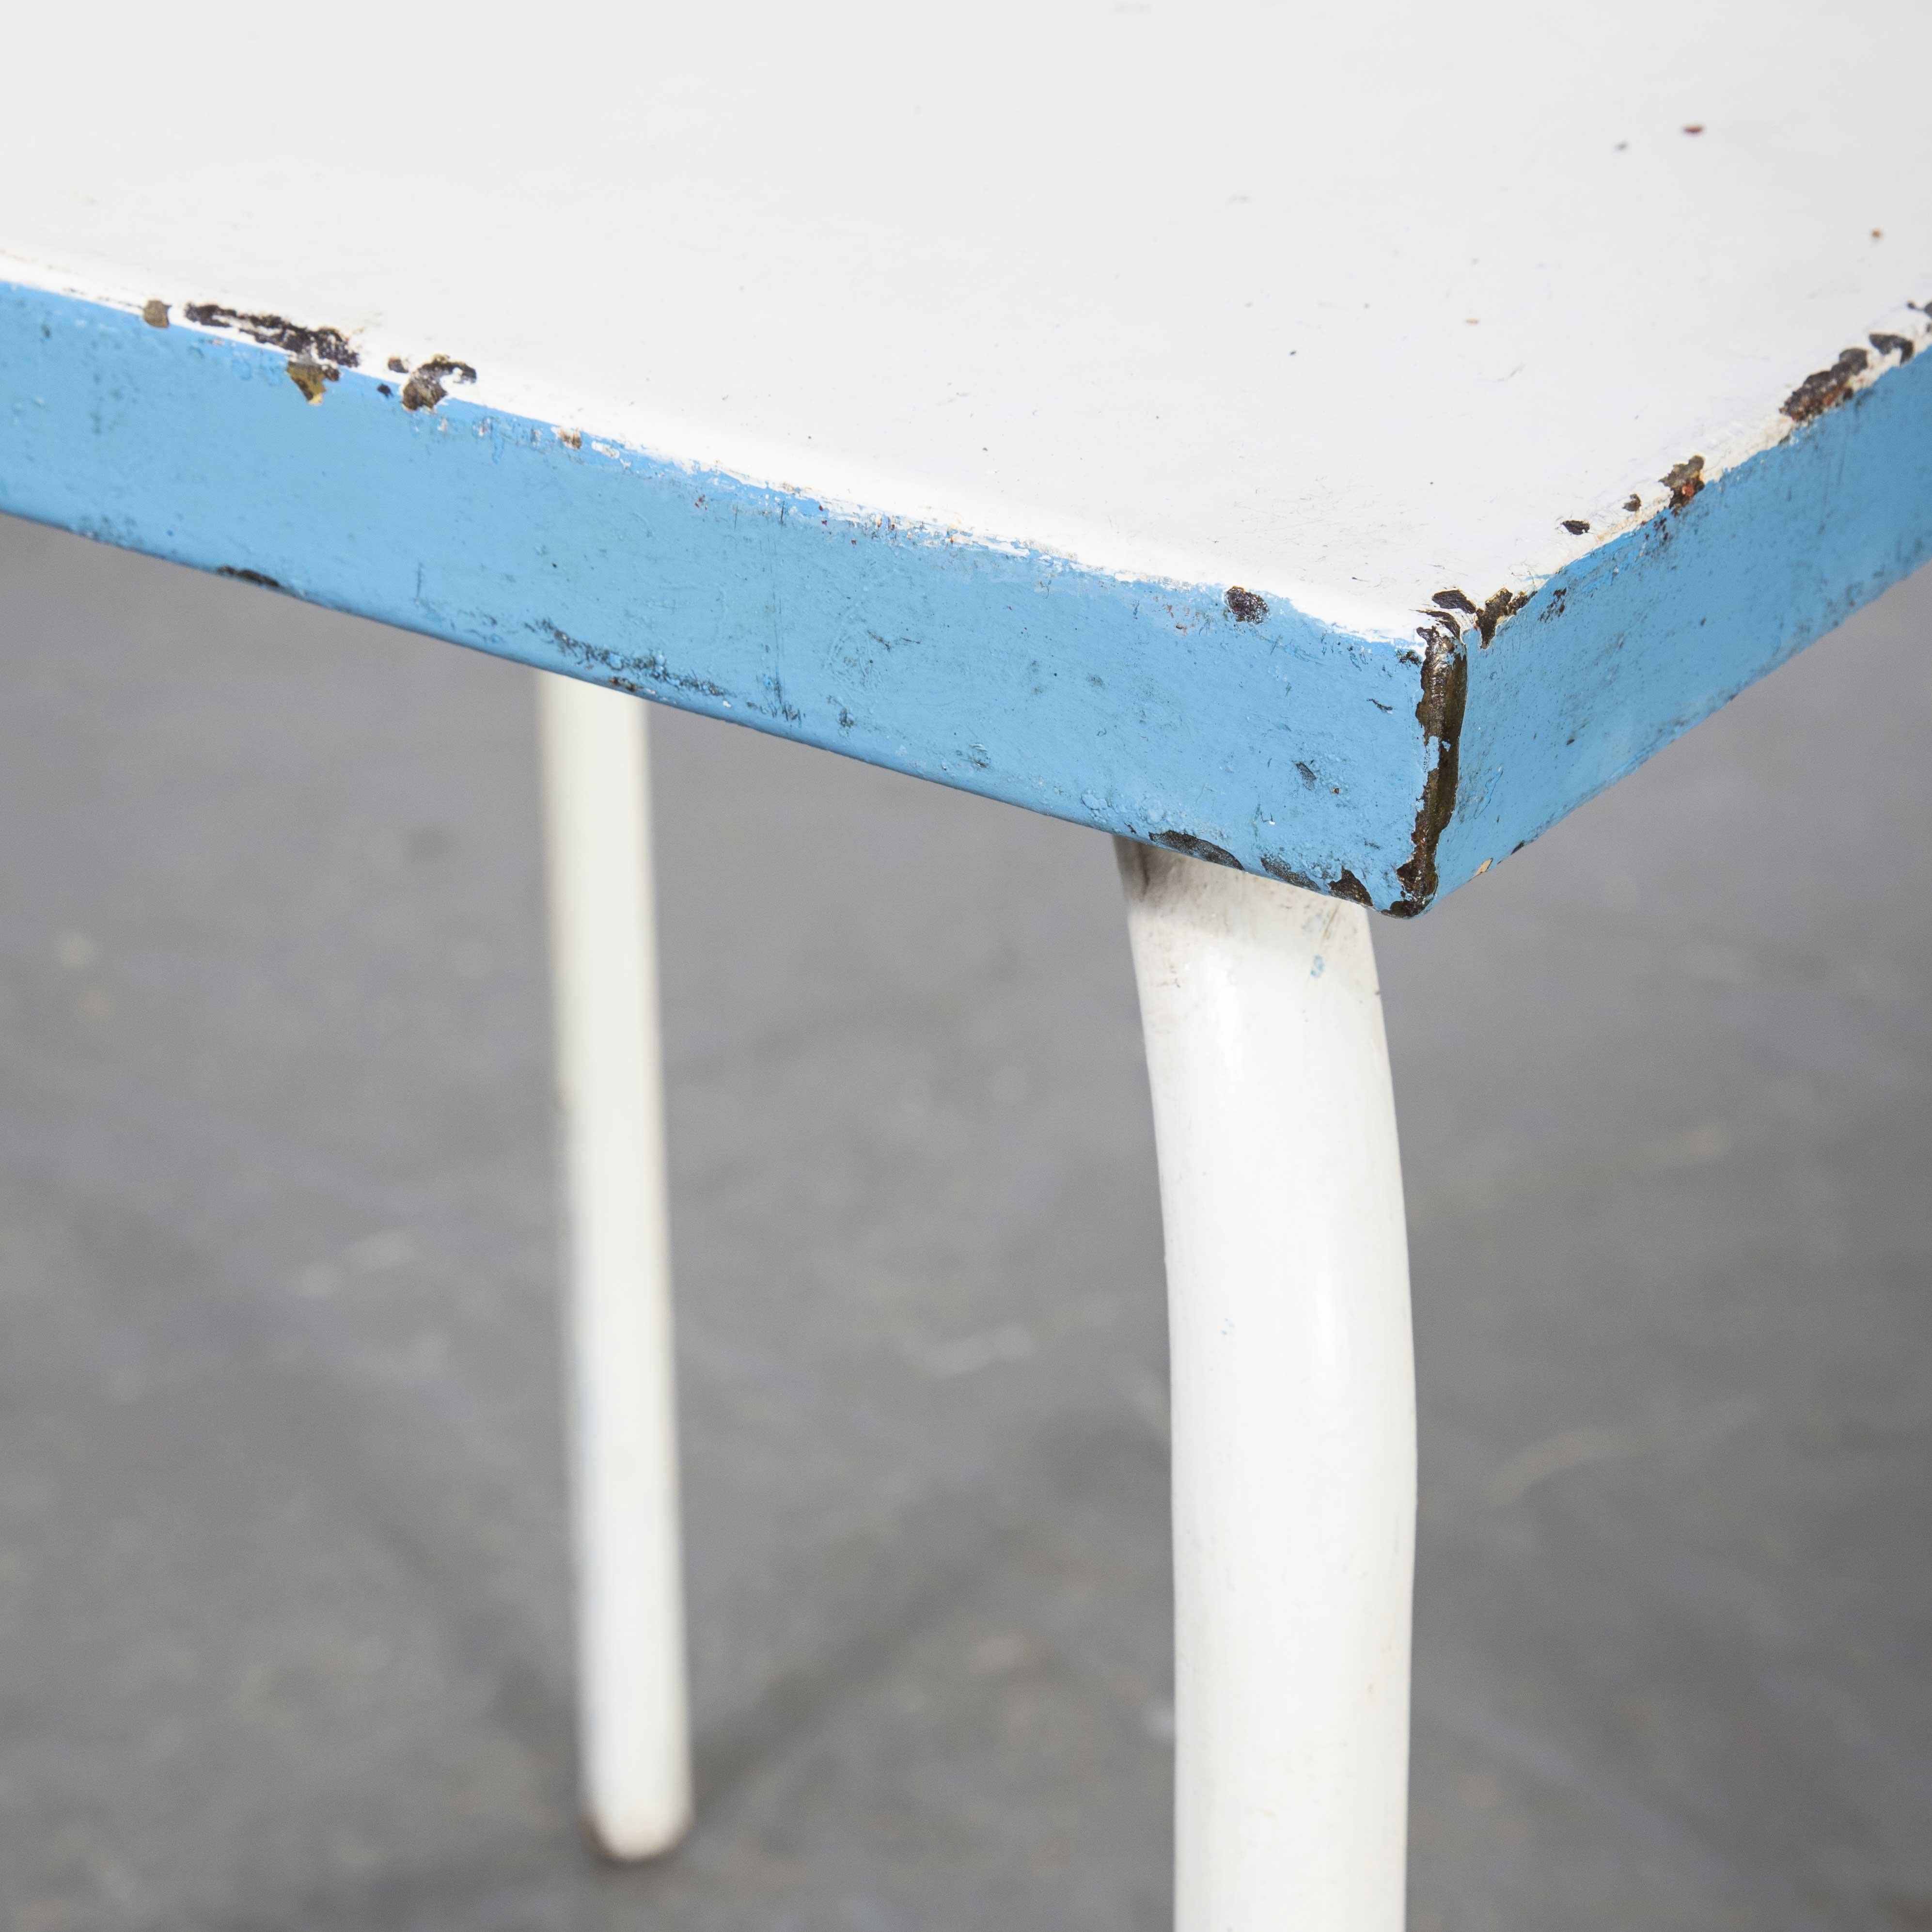 1950’s French metal garden table blue and white (model 836.2)

1950’s French metal garden table blue and white (model 836.2). Classic stacking metal outdoor table used on terraces and in gardens throughout France. Very practical because they can be